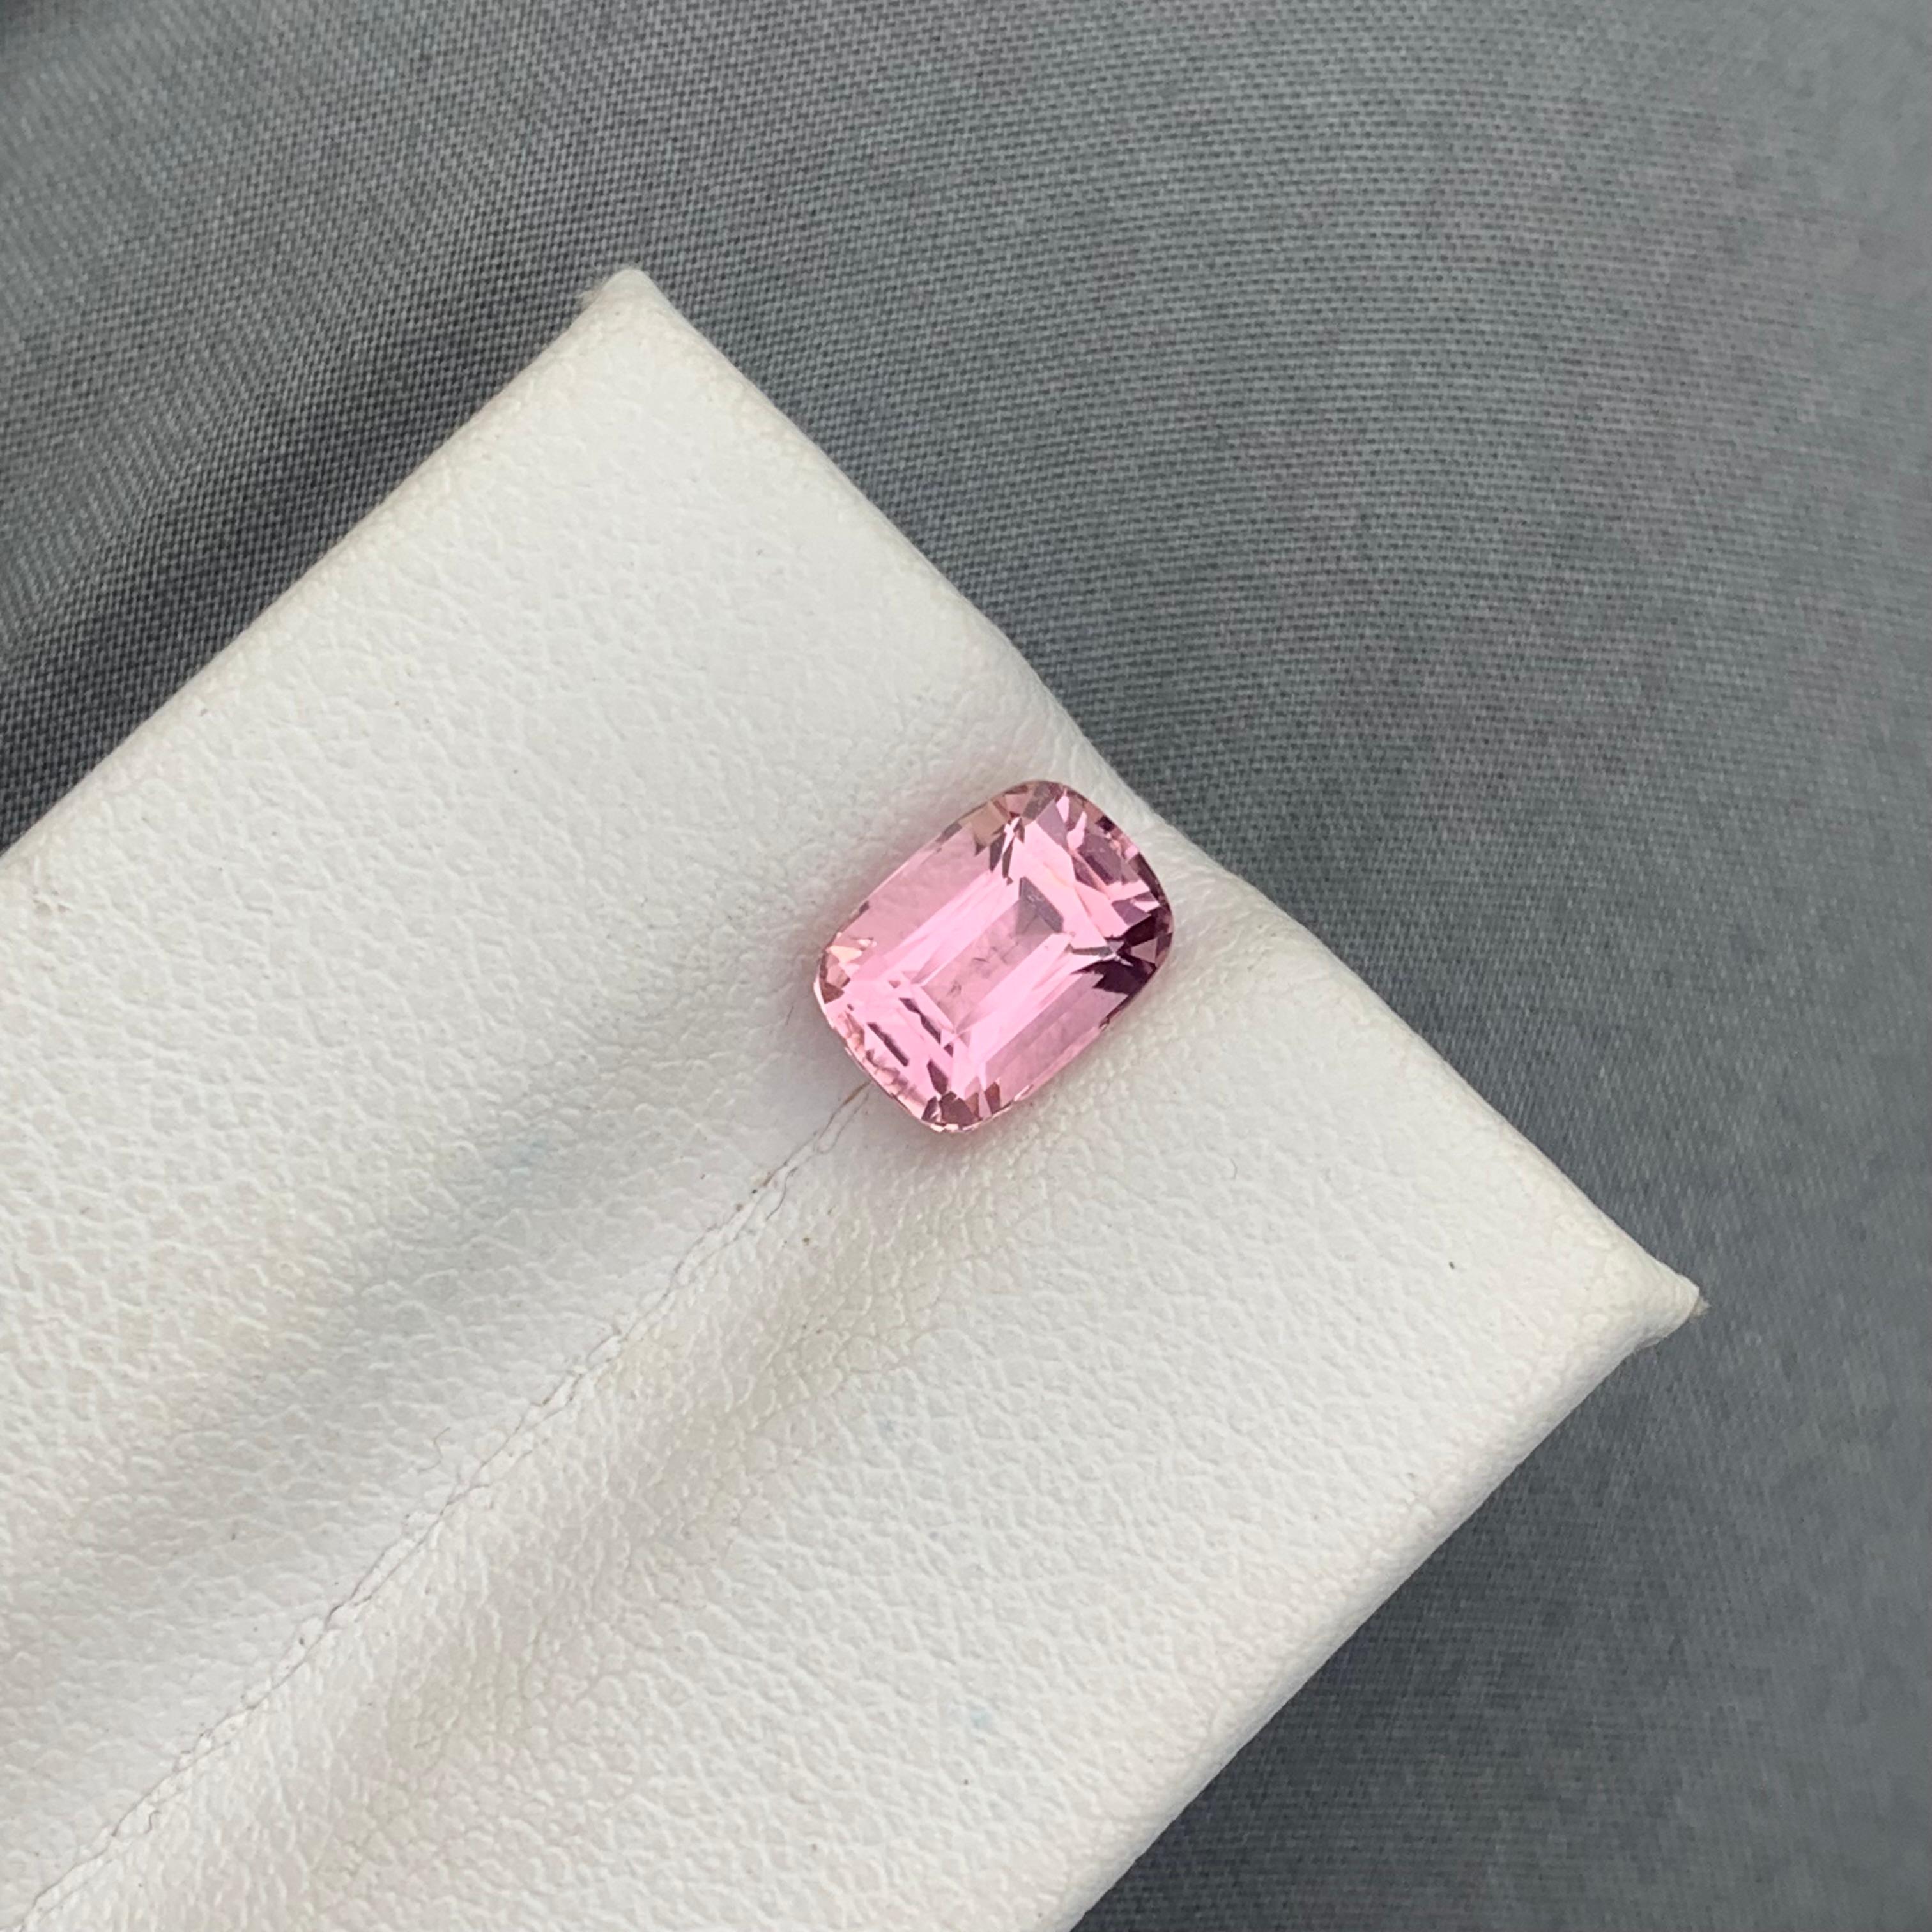 Cushion Cut Stunning 1.70 Carat Natural Loose Pink Tourmaline For Ring Jewellery Making For Sale